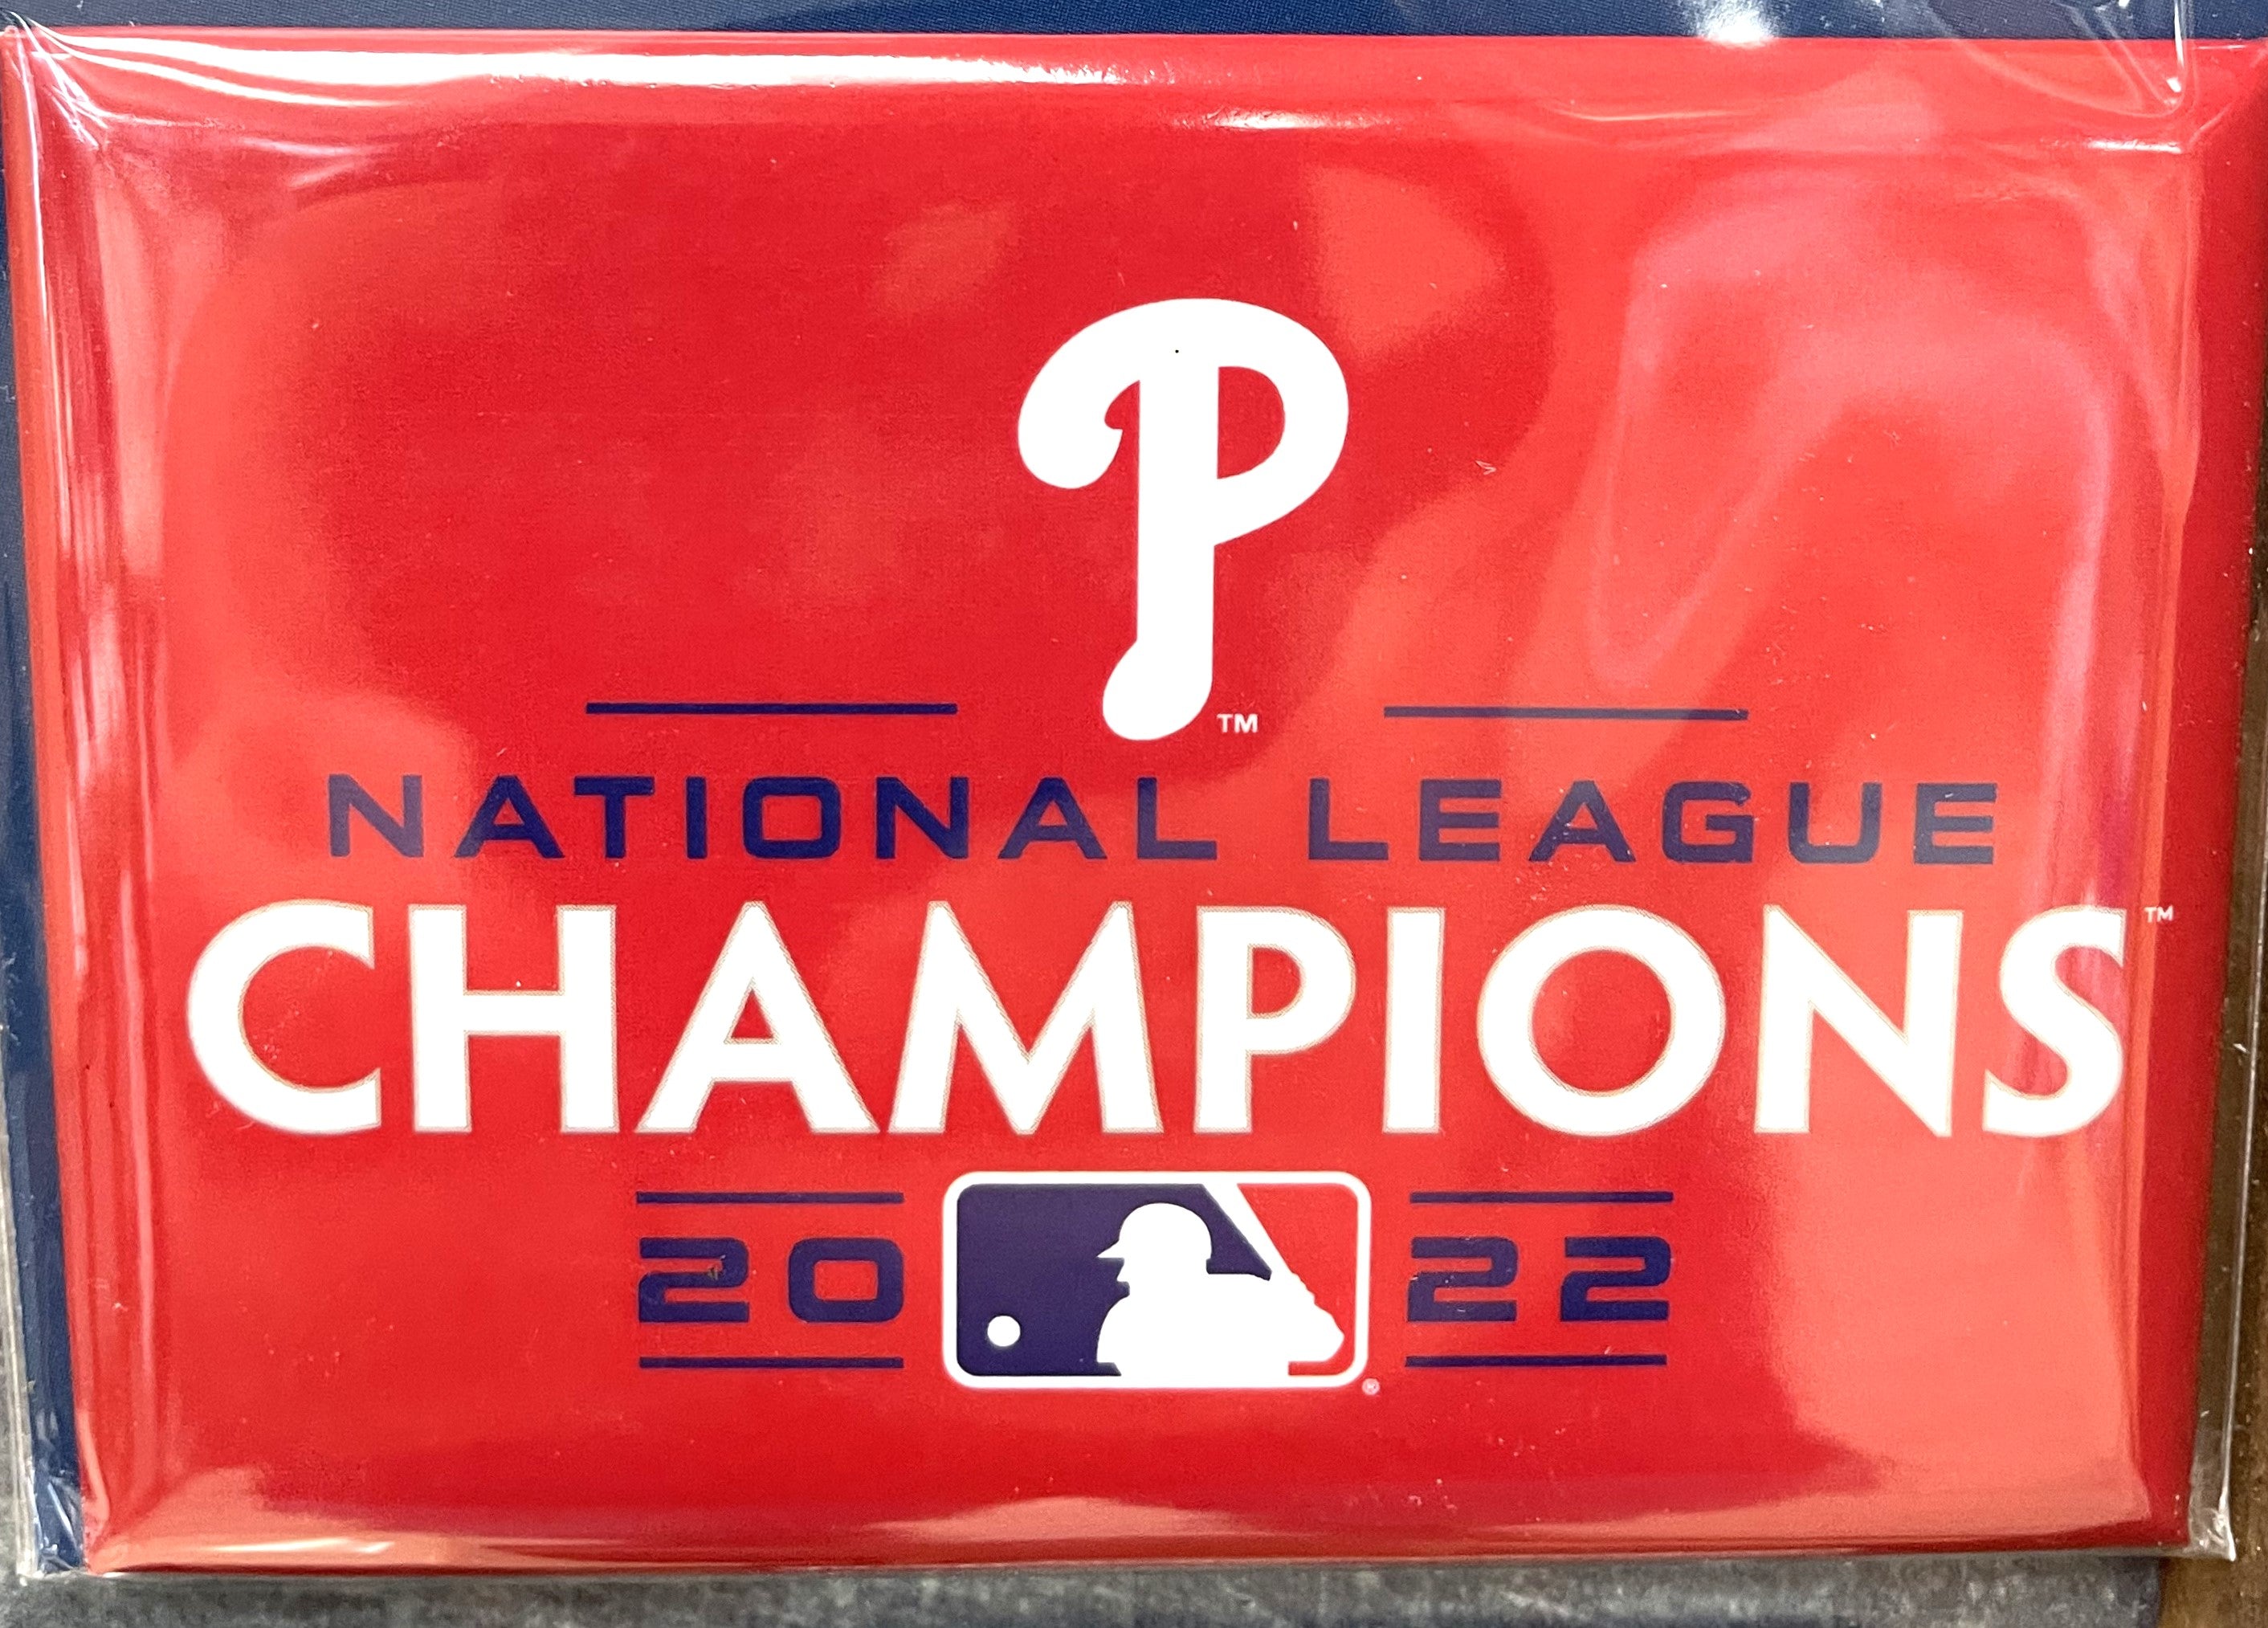 Philadelphia Phillies Are National League Champions 2022 And